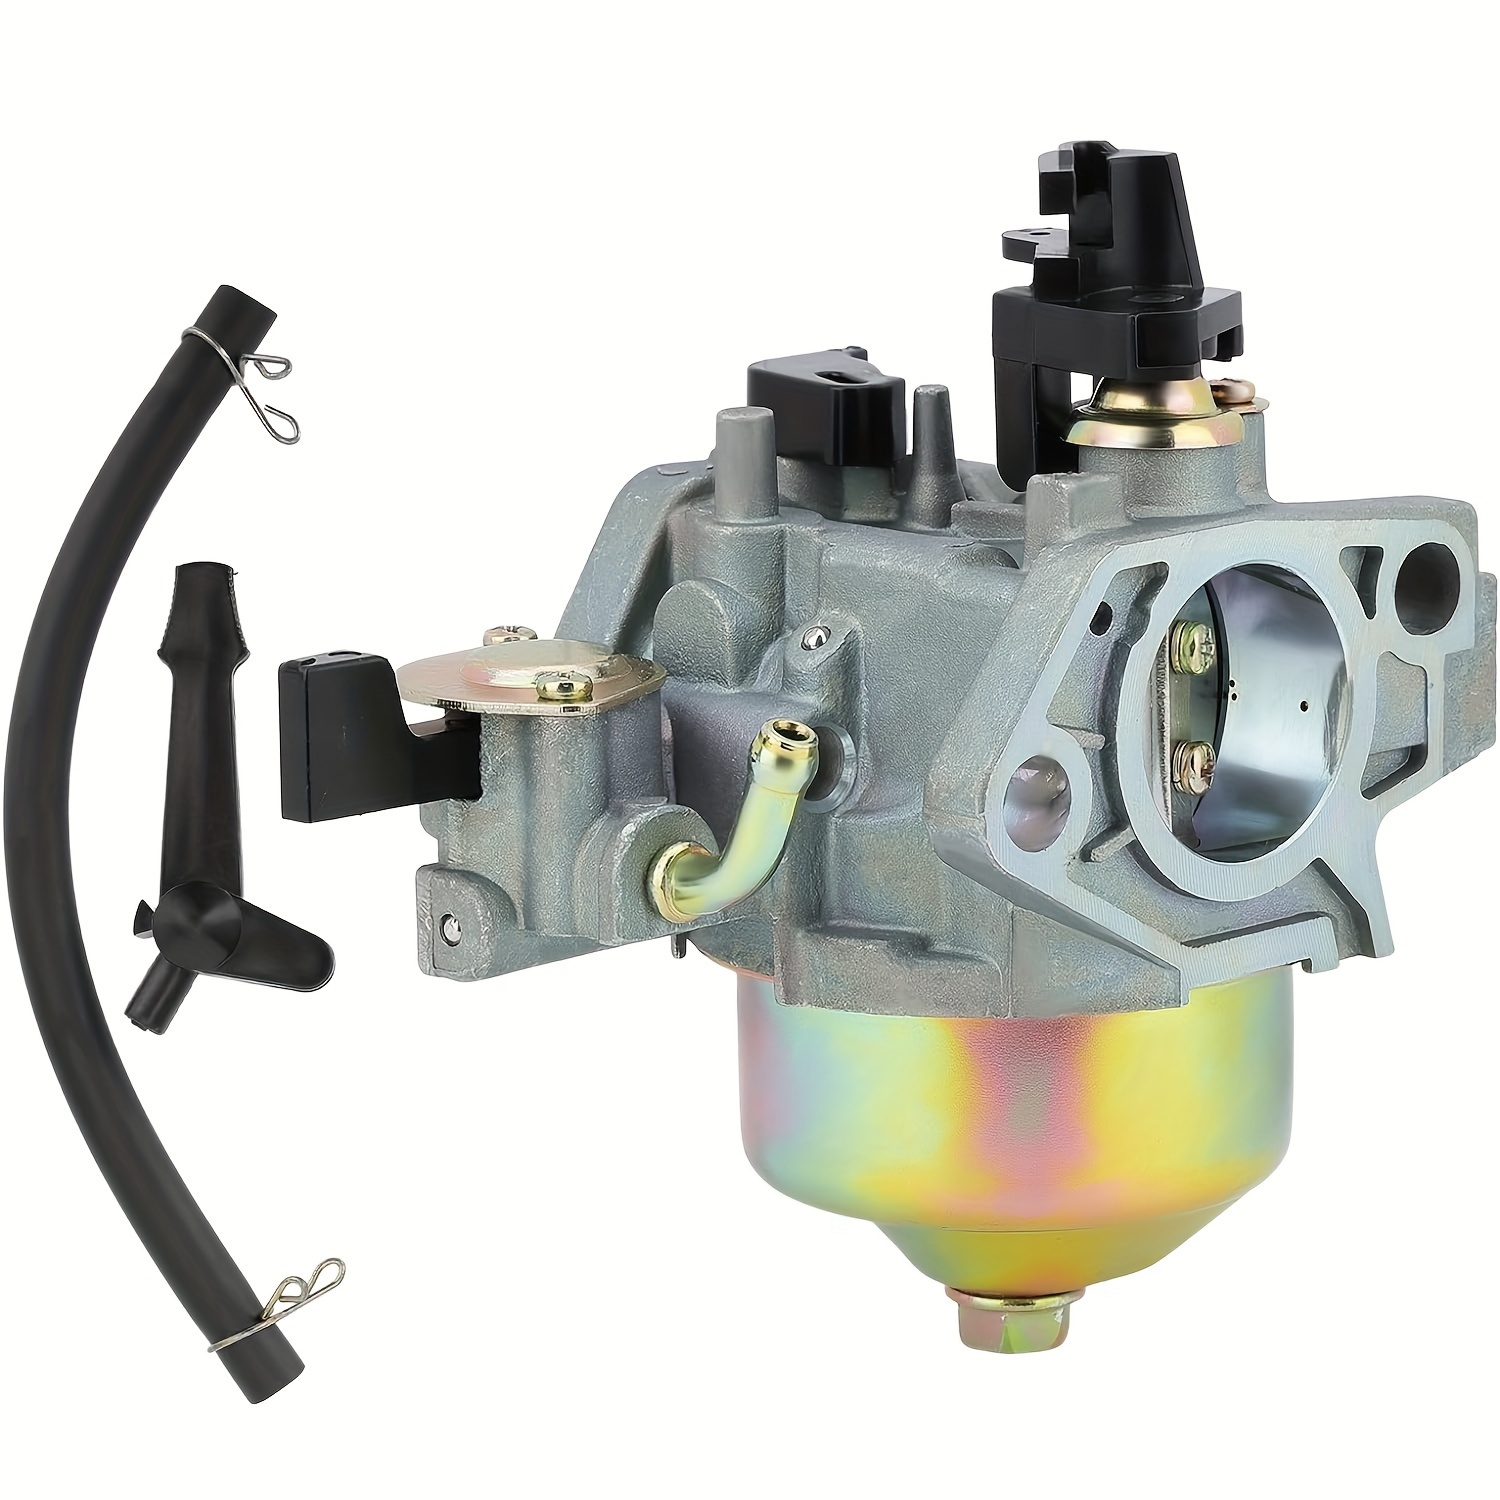 

Carburetor Compatible With Gx340 Gx360 11hp 13hp Engine Generator Lawn Mower Motor Replaces# 16100-zf6-v01